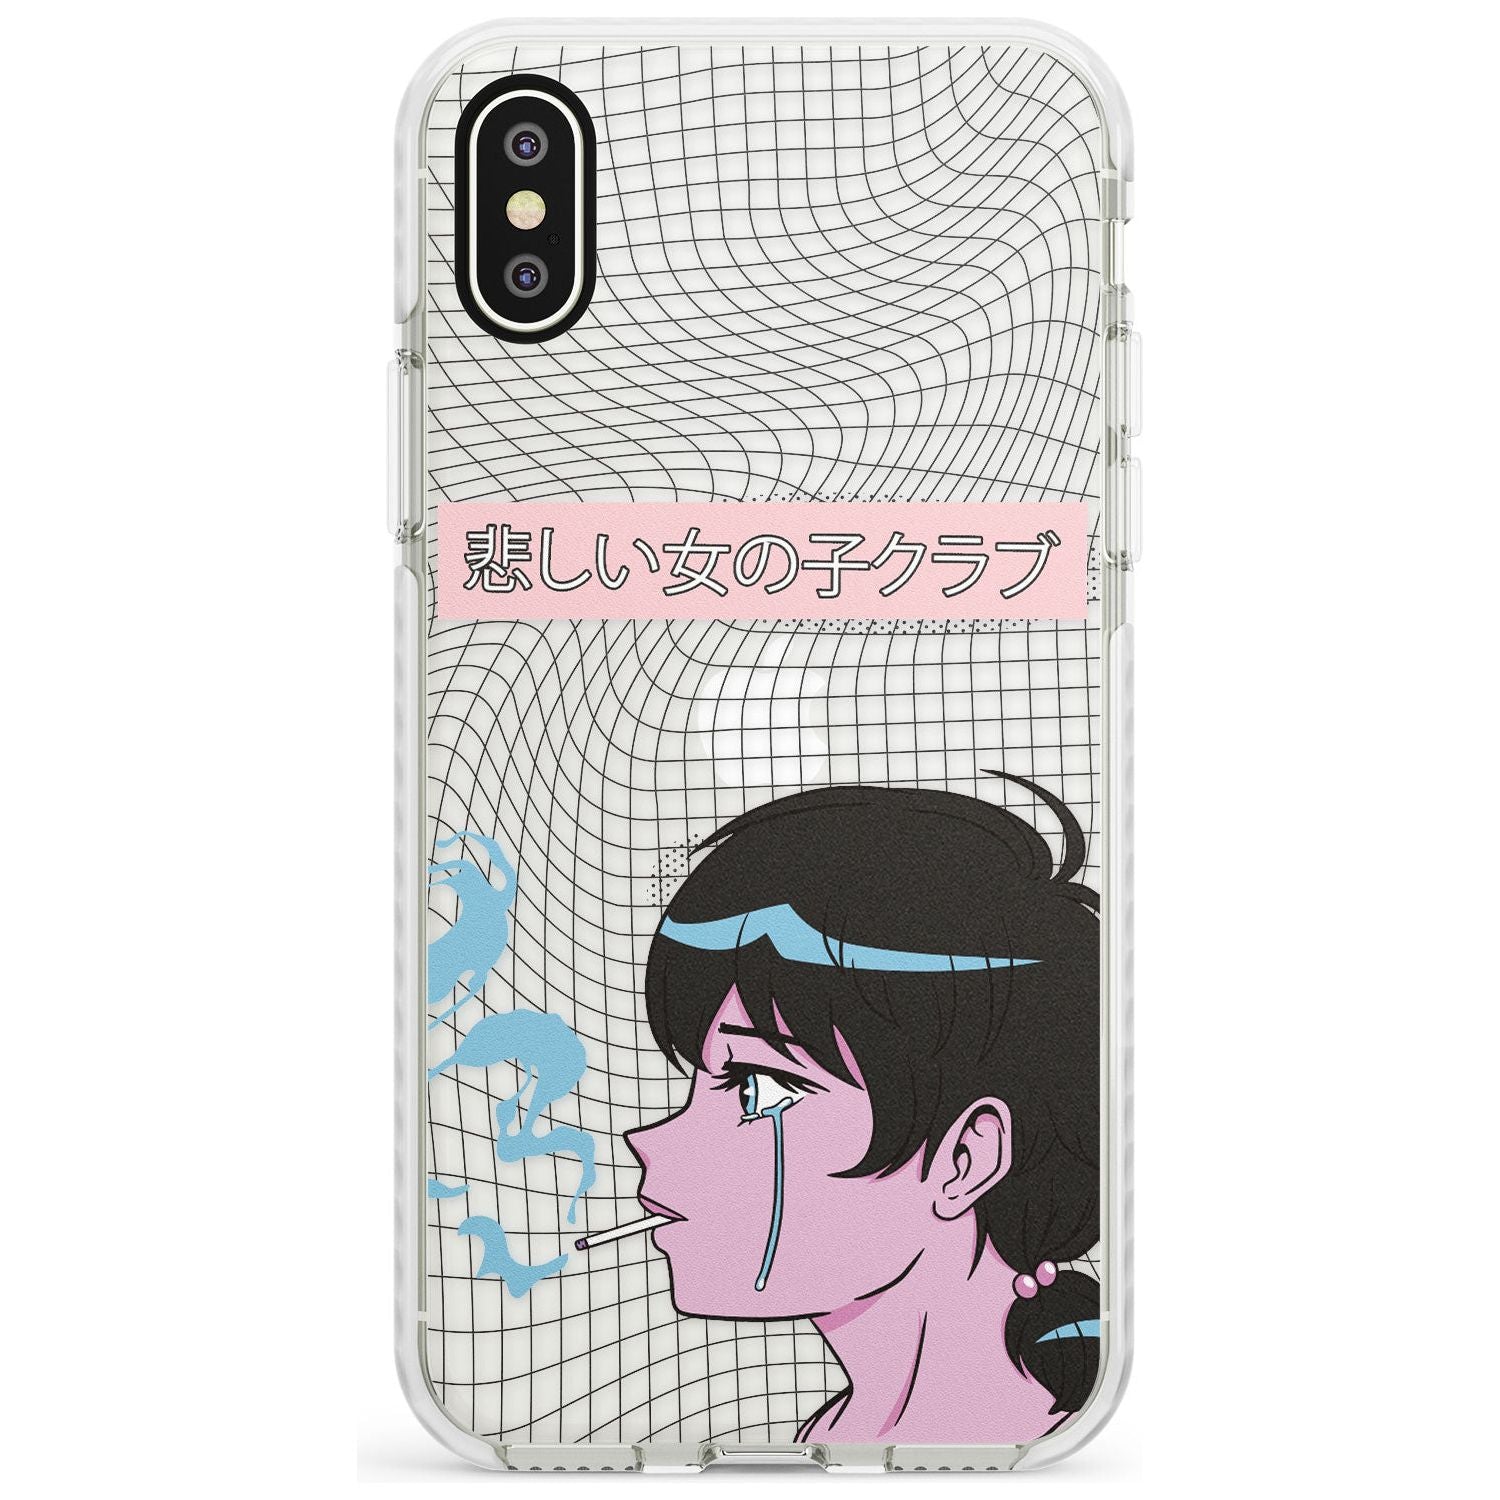 Lost Love Impact Phone Case for iPhone X XS Max XR